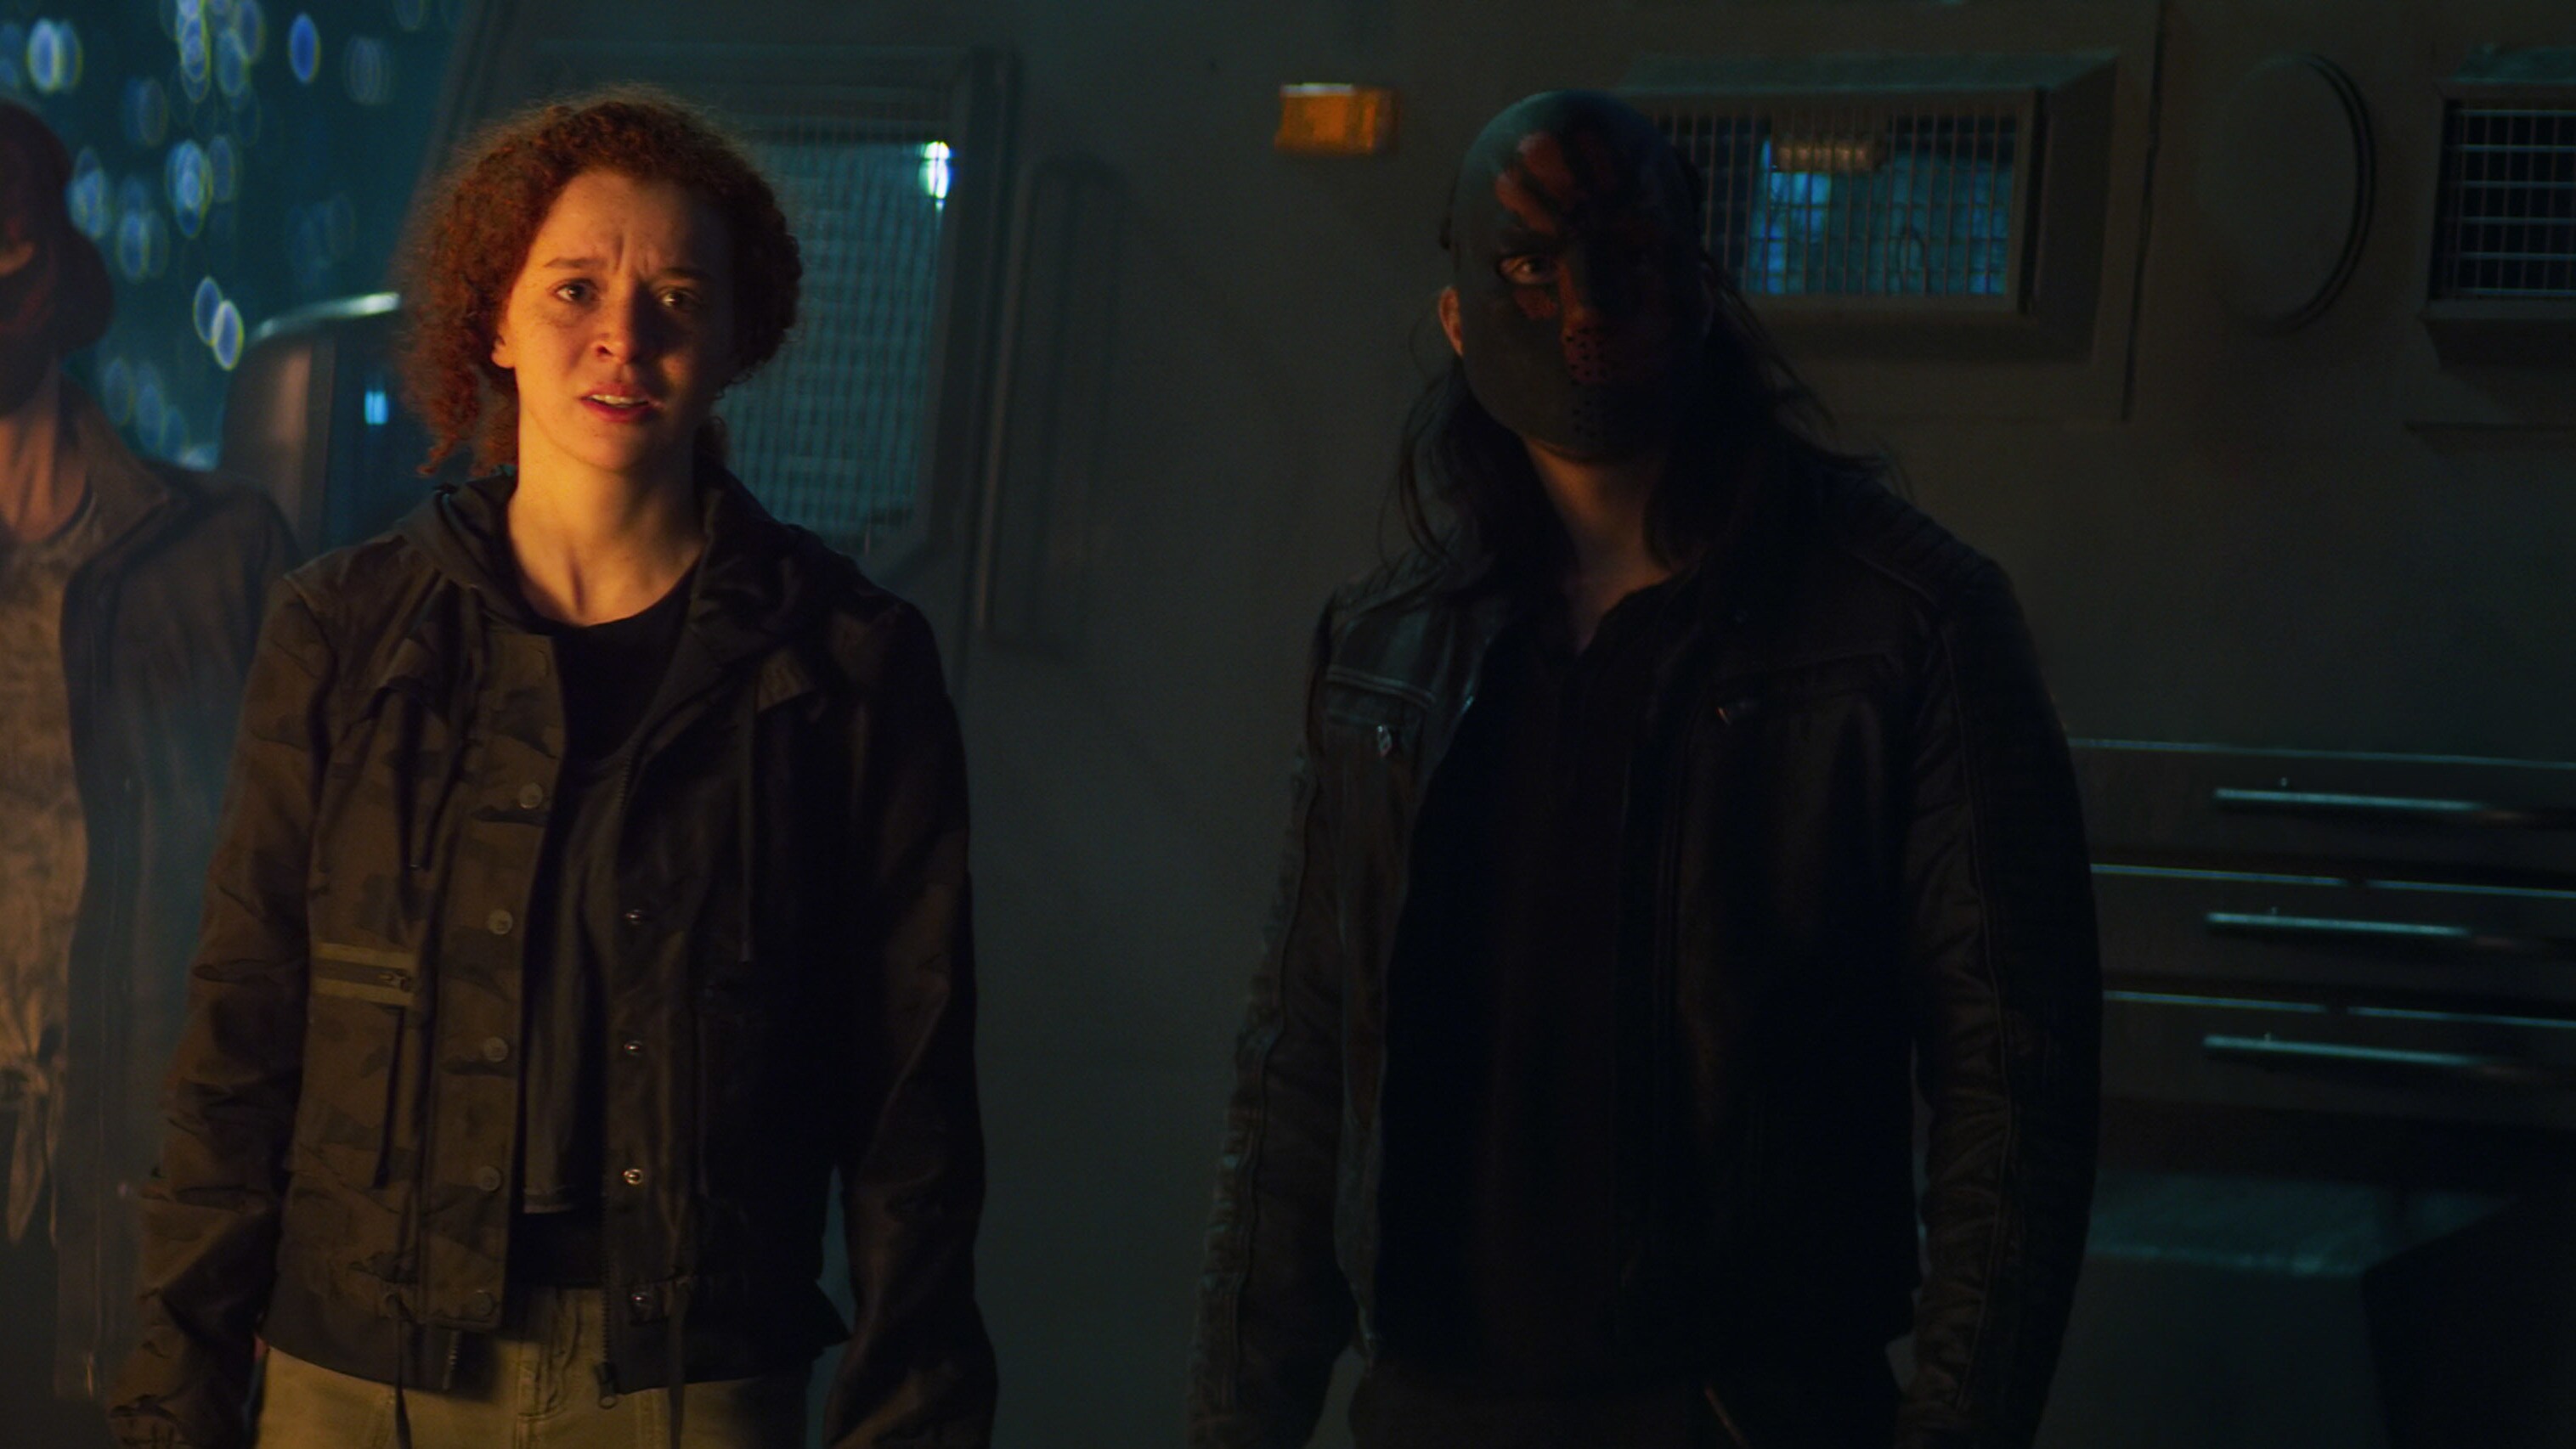 (Center): Karli Morgenthau (Erin Kellyman) in Marvel Studios' THE FALCON AND THE WINTER SOLDIER exclusively on Disney+. Photo courtesy of Marvel Studios. ©Marvel Studios 2021. All Rights Reserved.